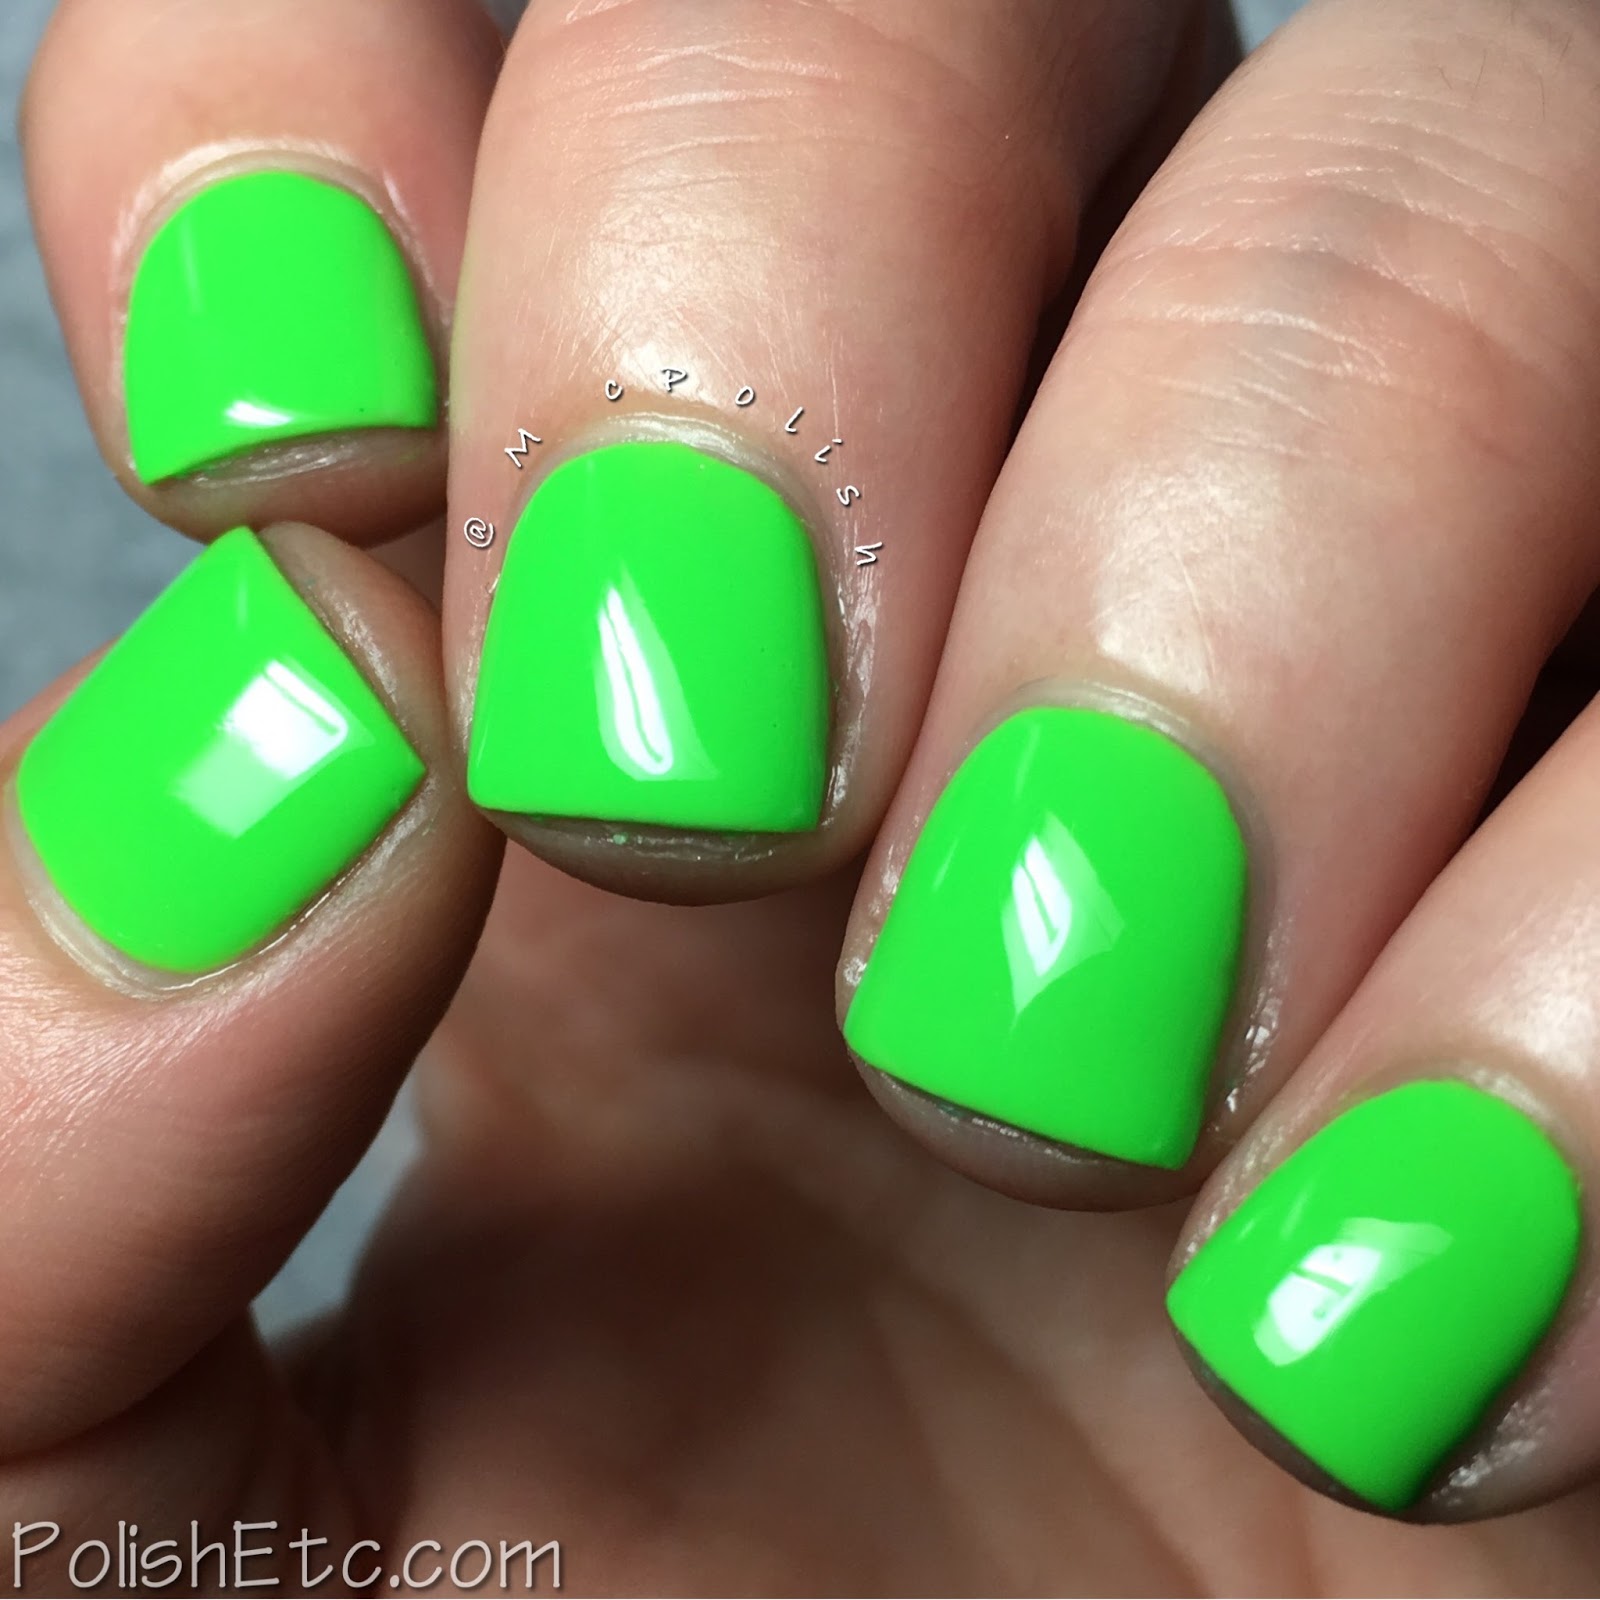 KBShimmer - All The Bright Moves Collection - McPolish - Race Against Slime